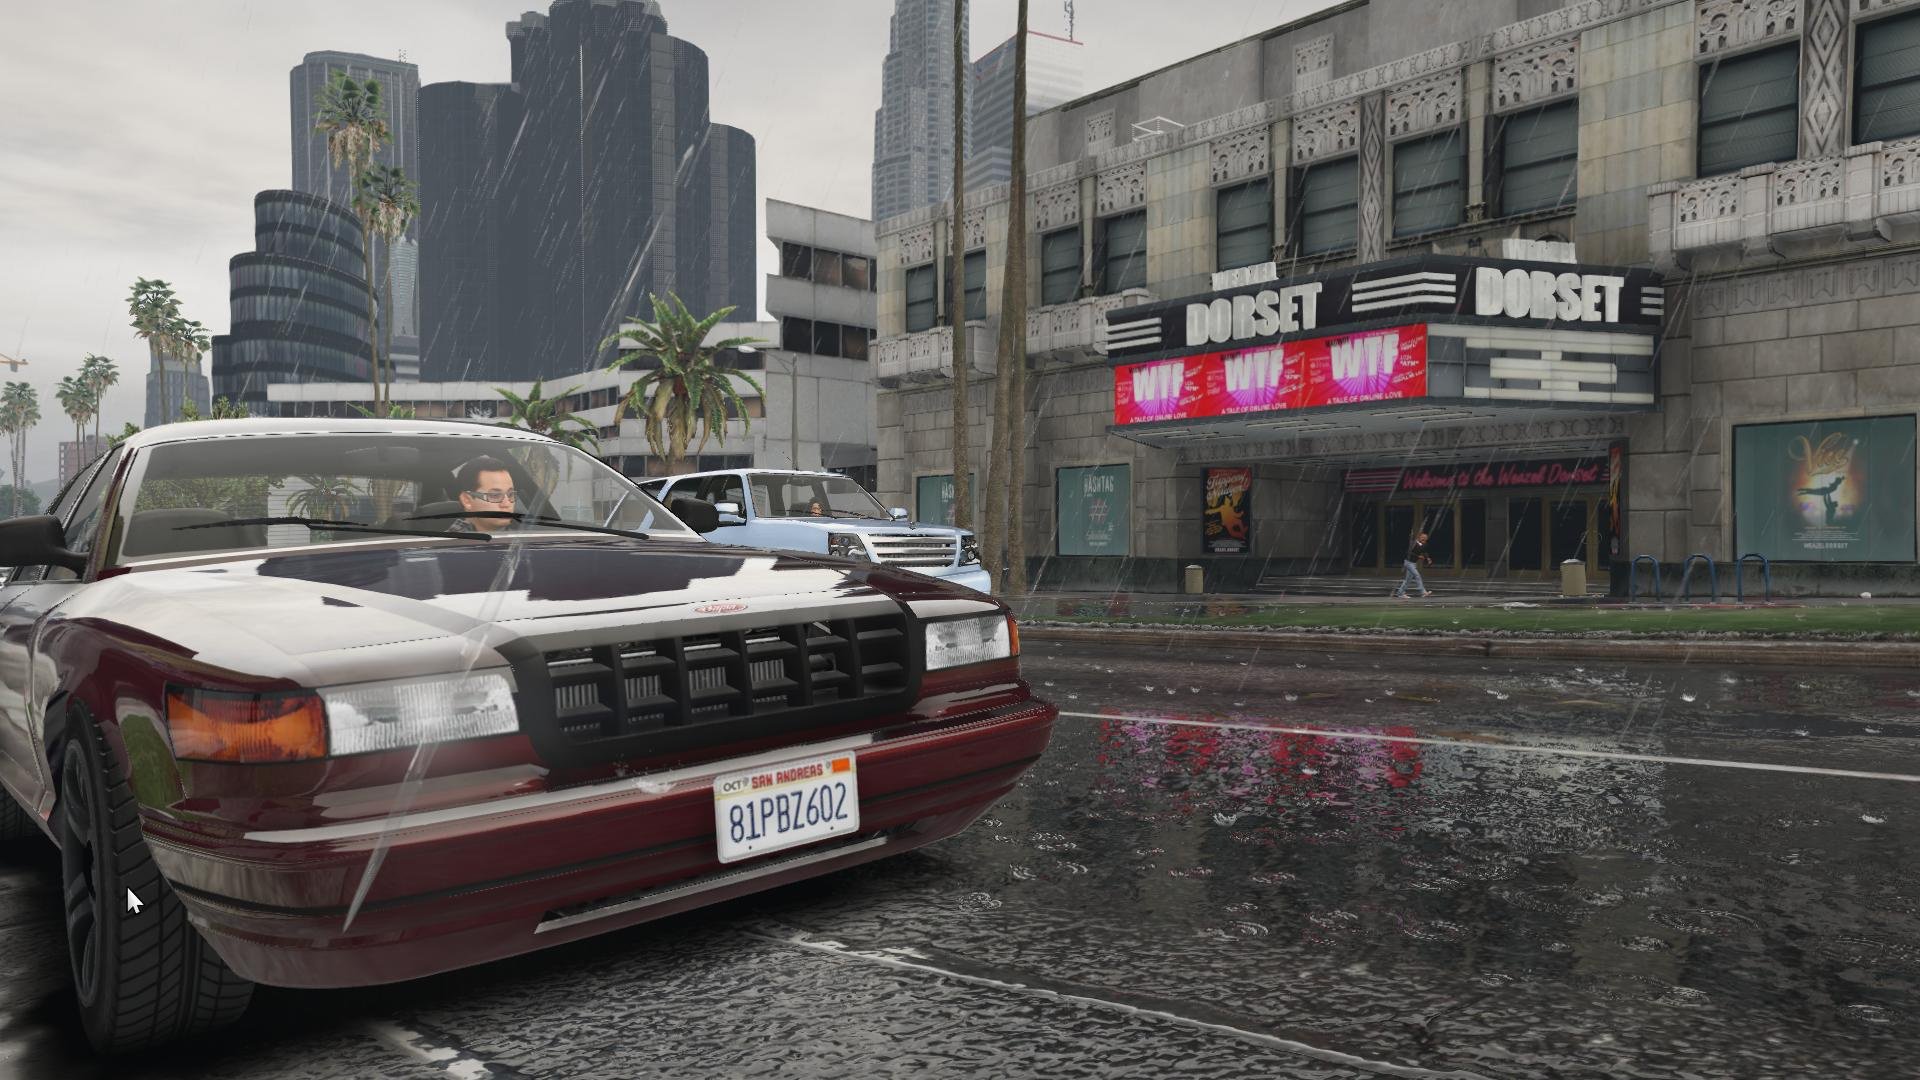 Best GTA V Graphics Mods: Our Top 15 Picks You Have to Try